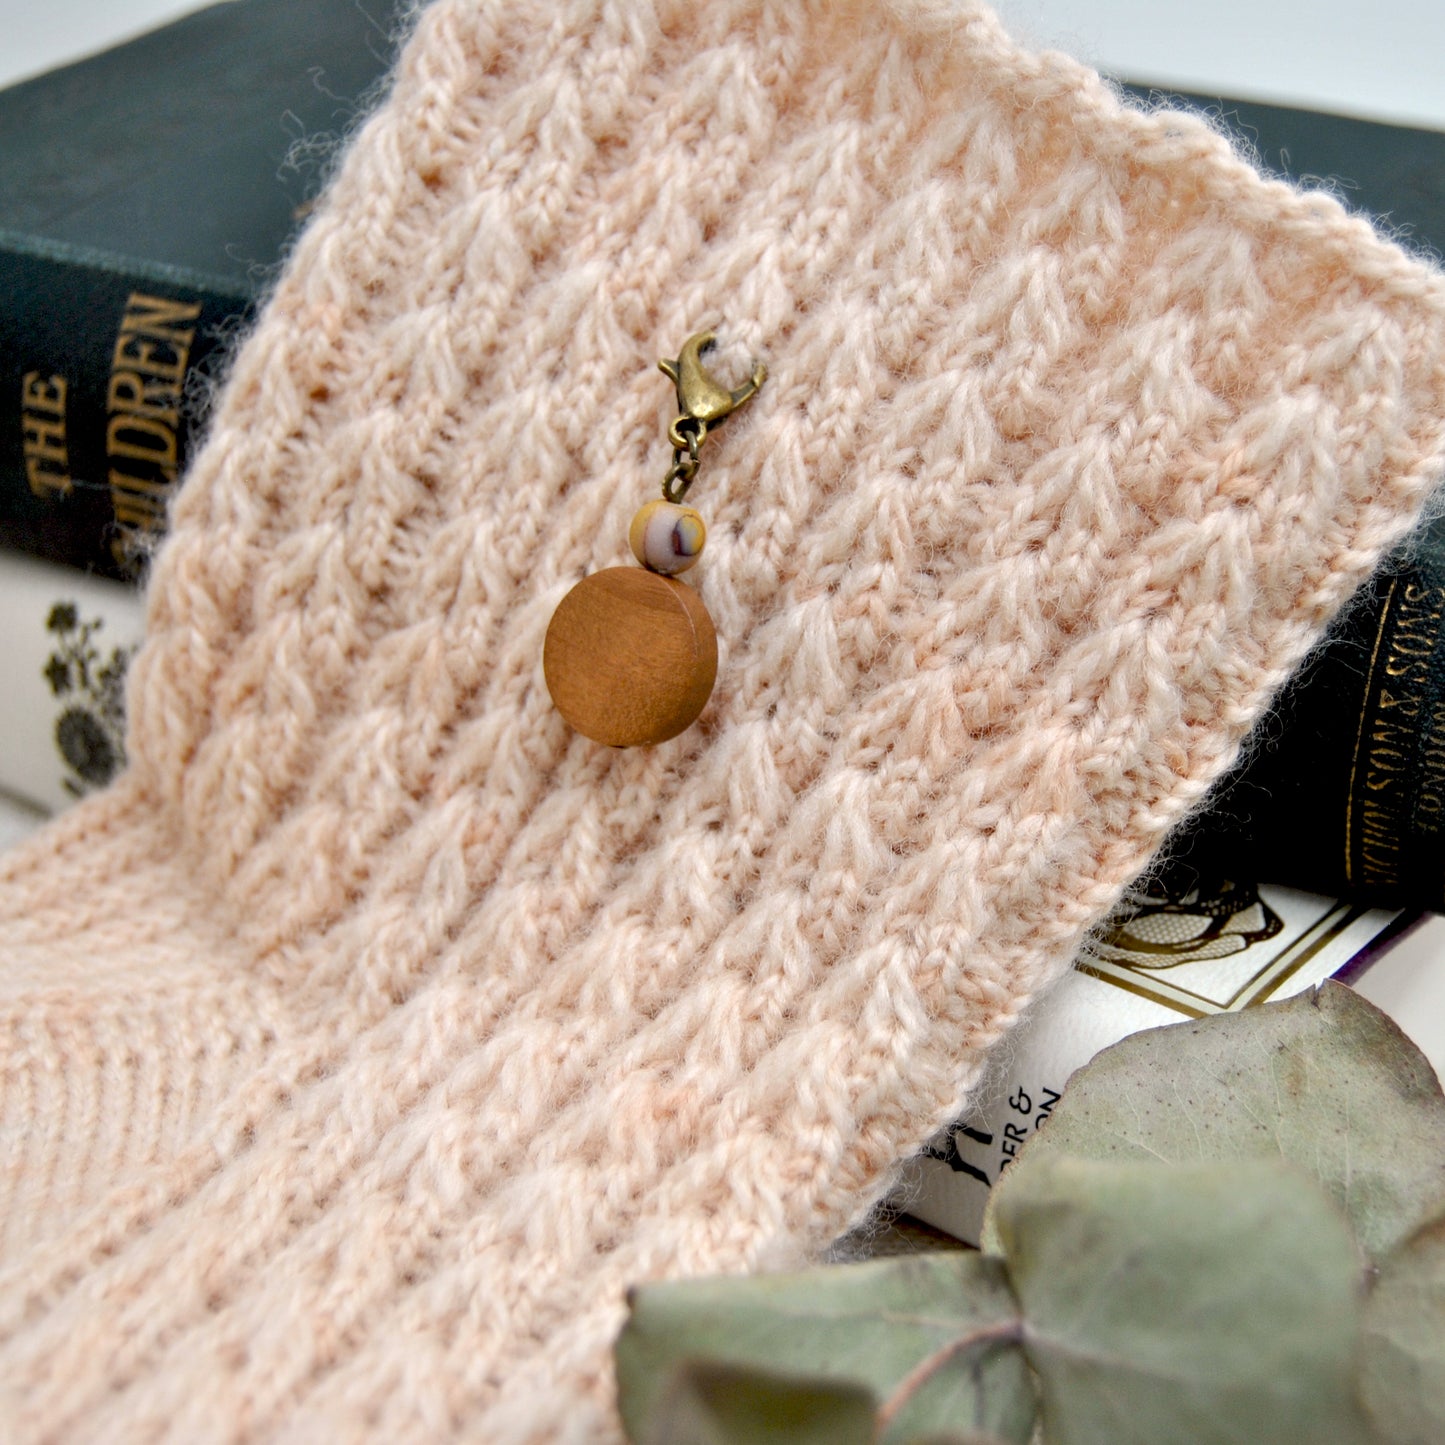 Natural mookaite and wood stitch marker